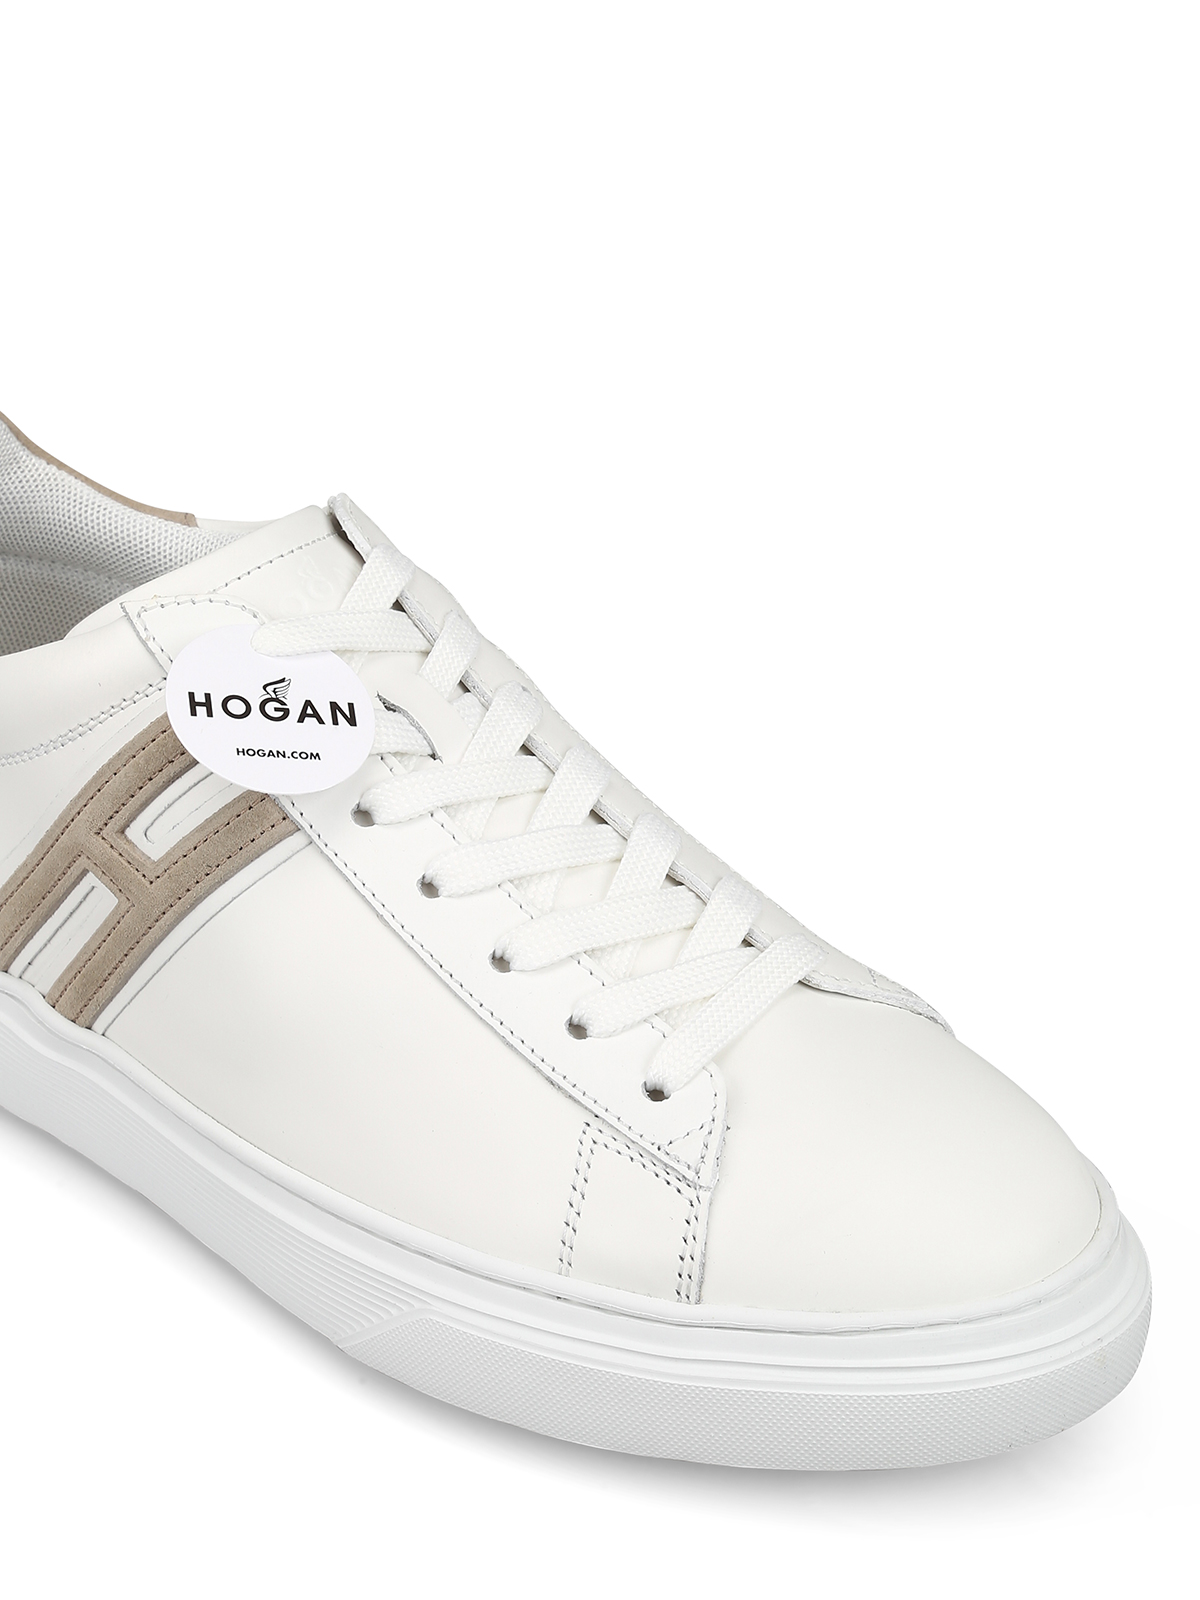 Hogan - H365 white sneakers - trainers 